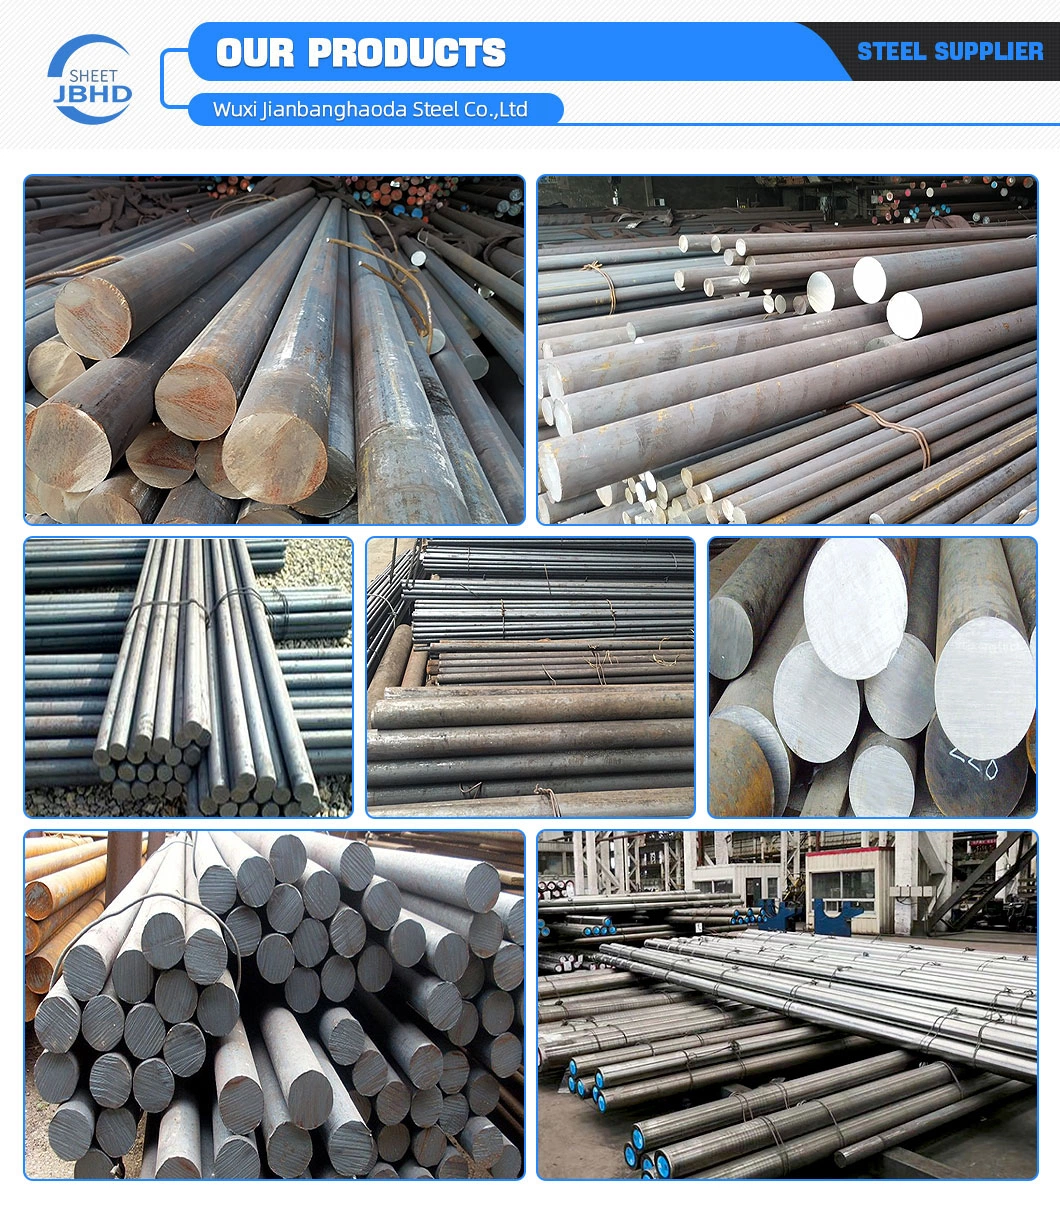 50%off AISI 4140, 42CrMo, H13, Sdk11, P20, DIN 16mncr5 Carbon Steel Bar Mould Steel Sheet/Plate/Round Bar/Flat Bar Die Bar Alloy Bar in China